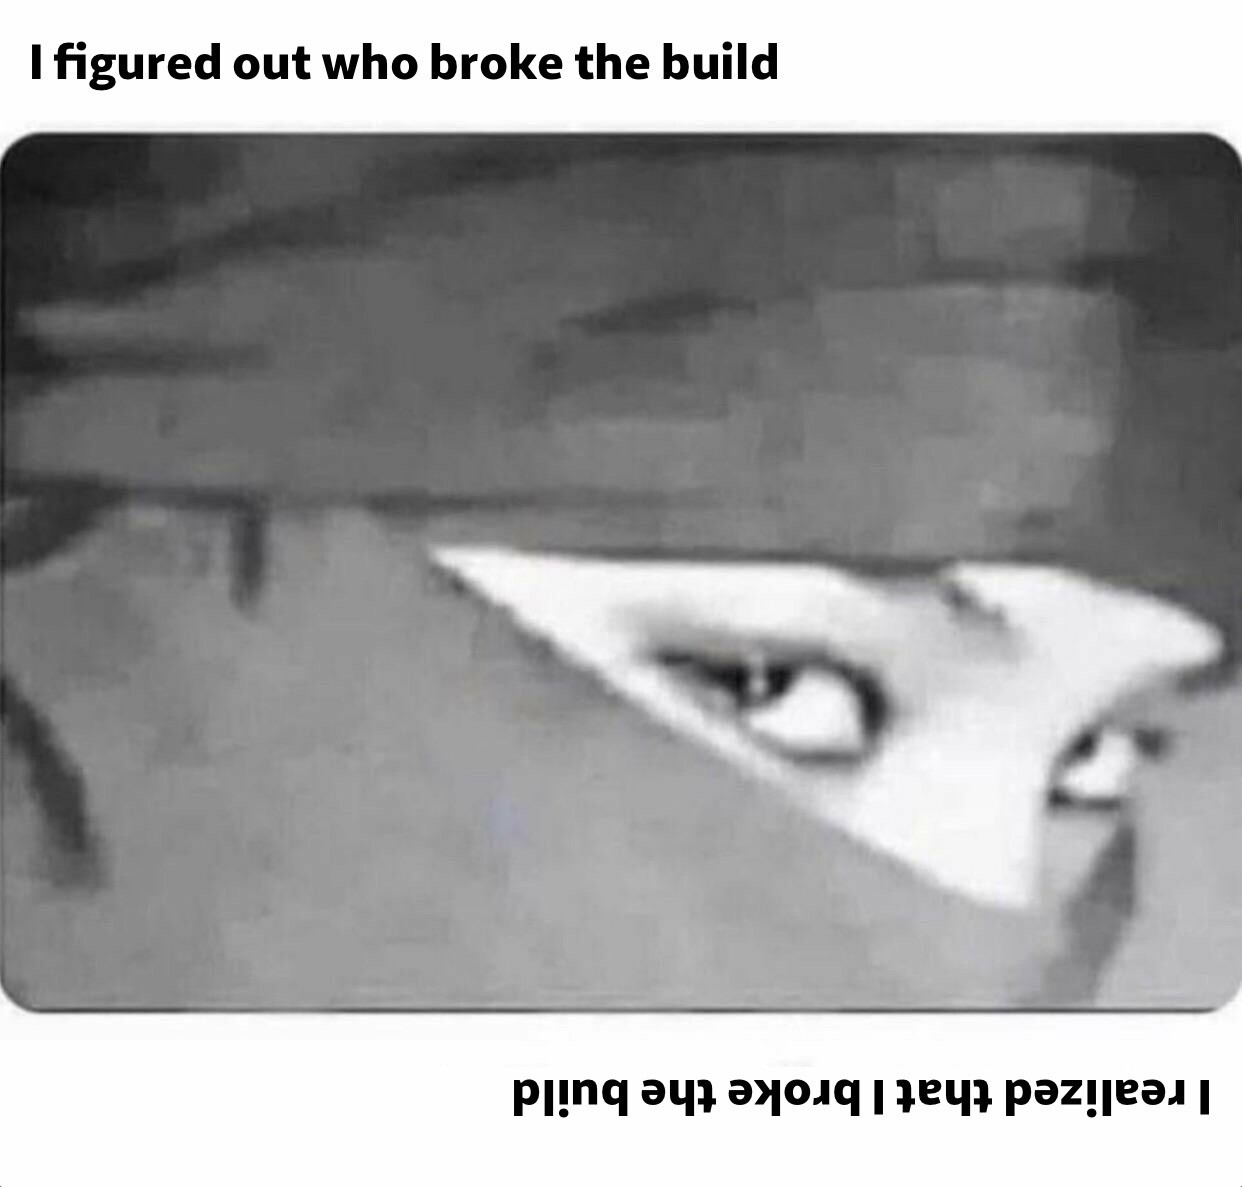 Image of a Ninja, who figured out who broke the build. When upside down, it looks like it was the ninja, who broke the build